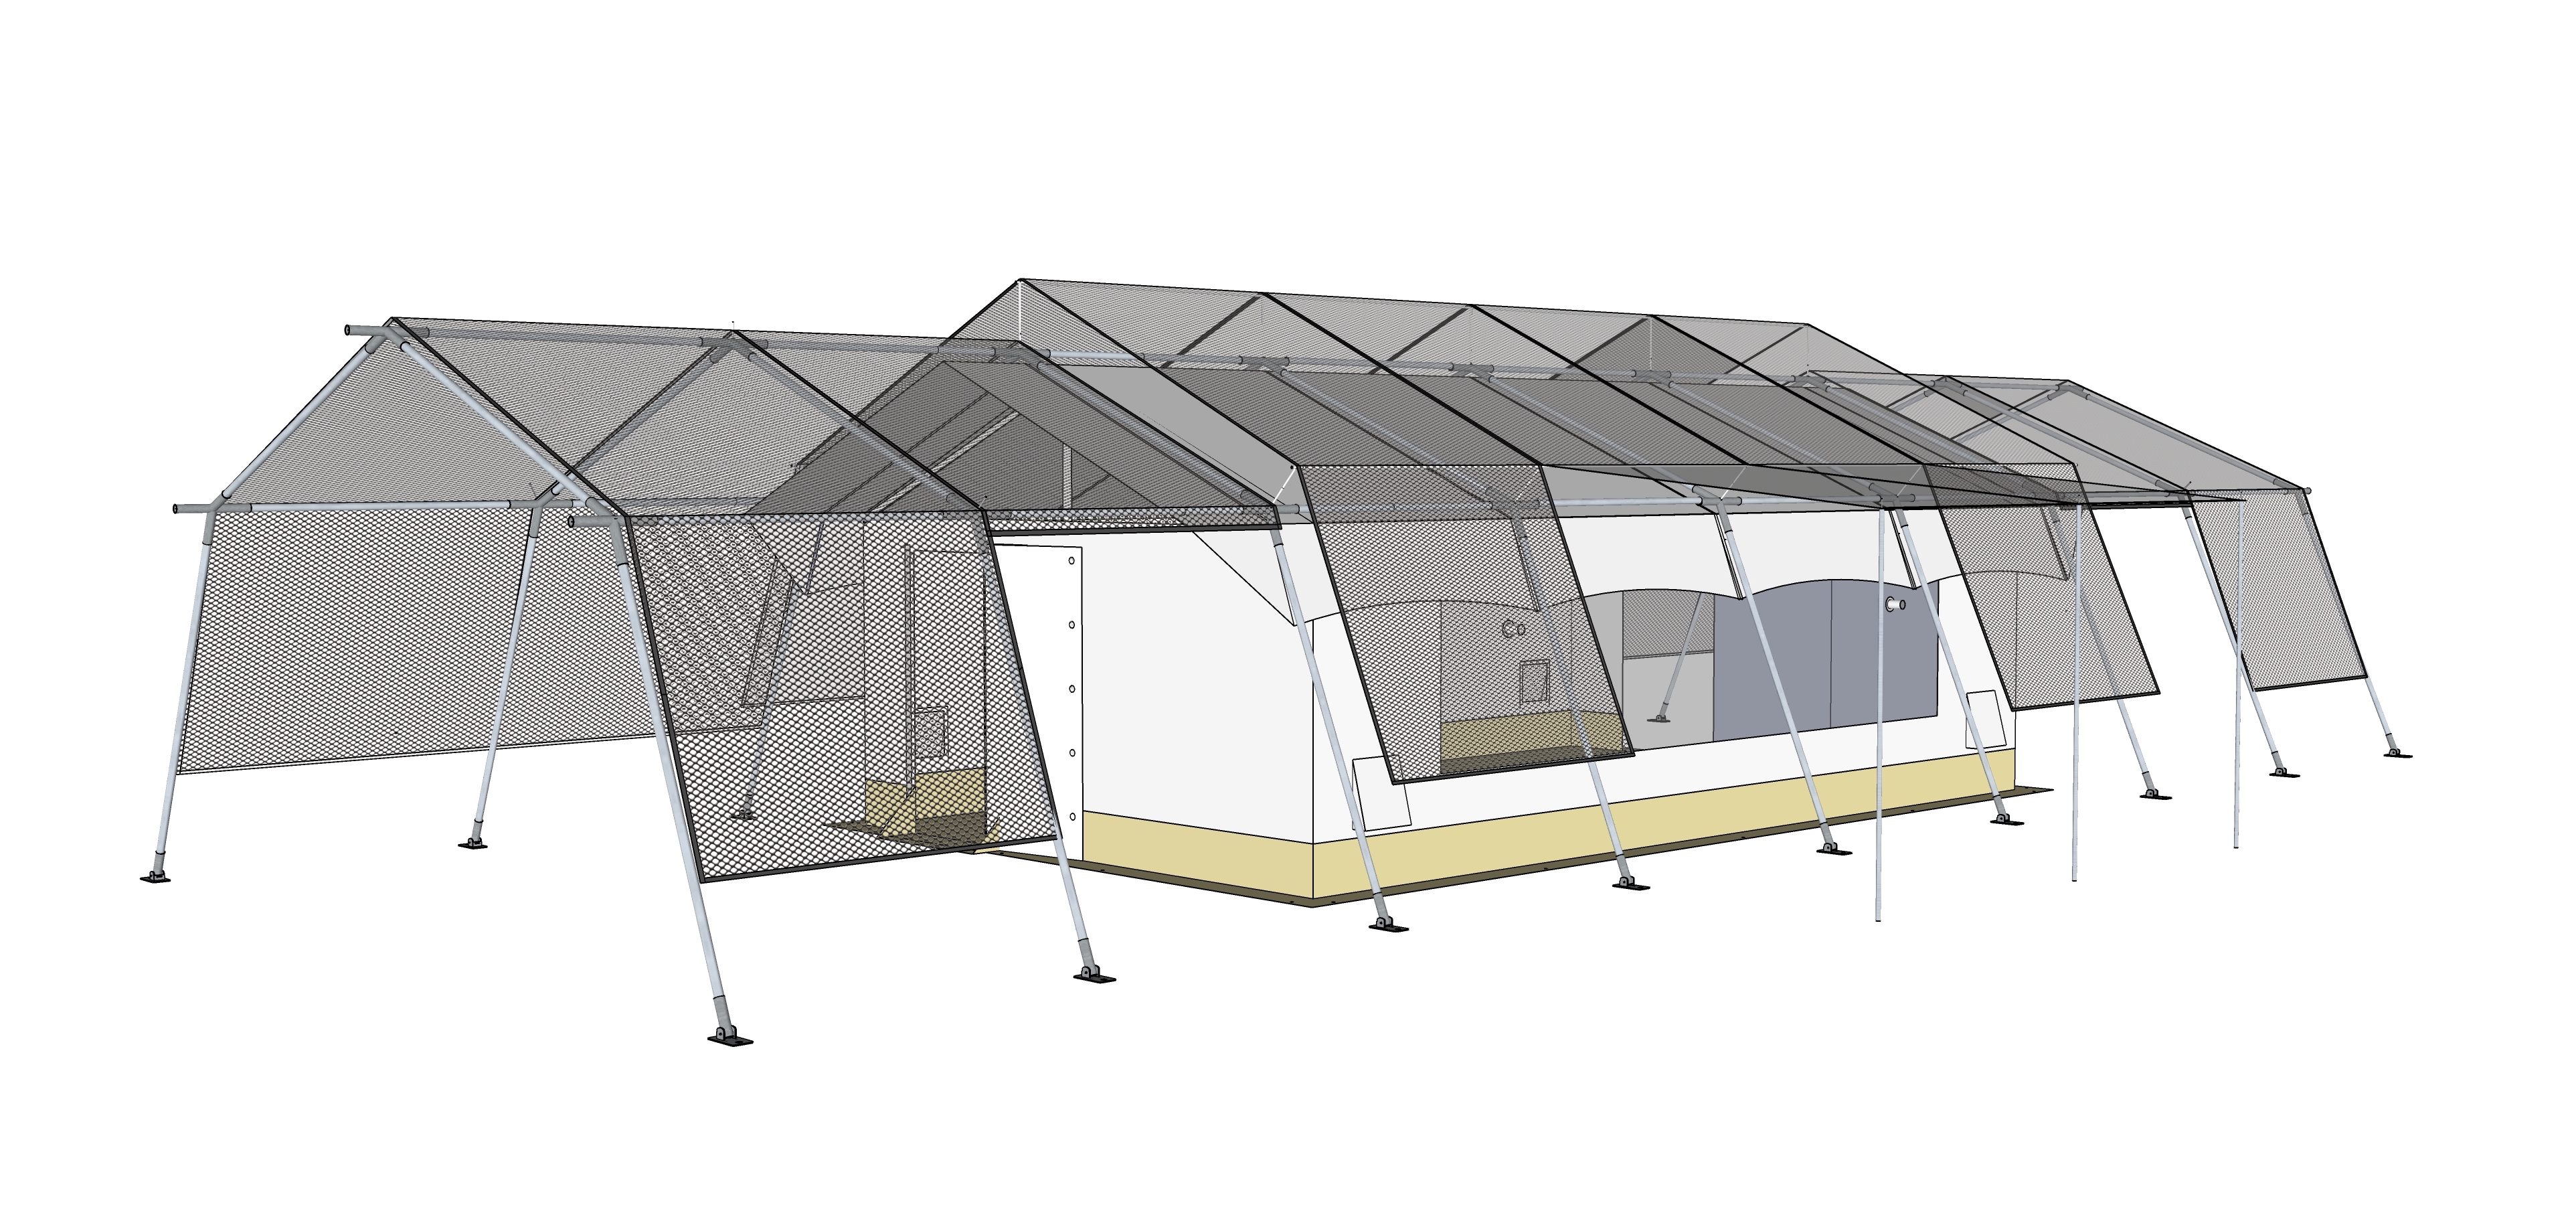 Main tent + extended shade net